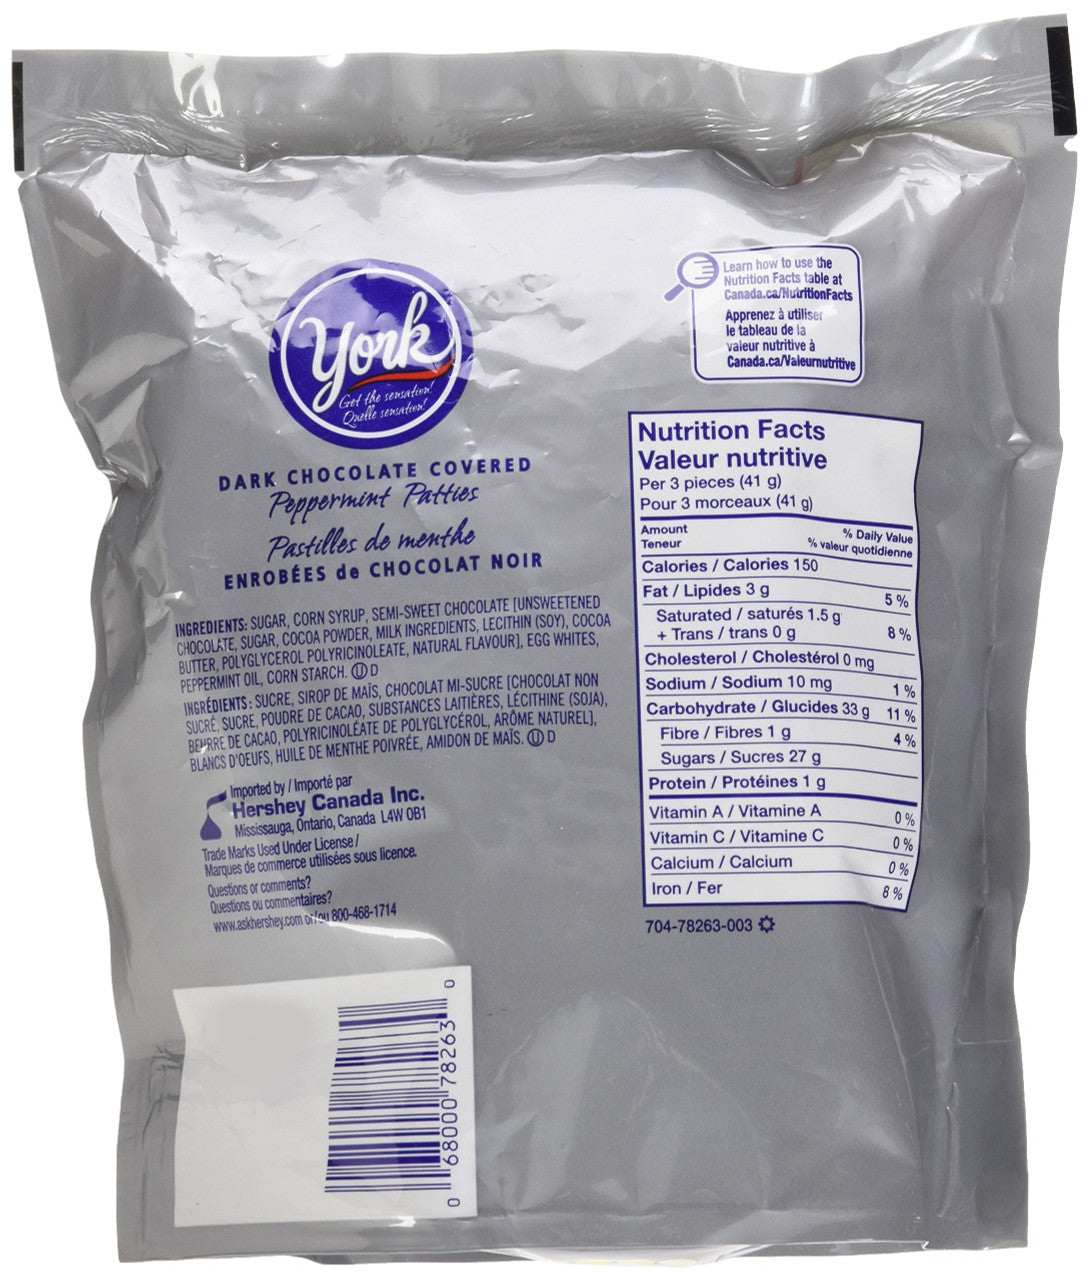 YORK Dark Chocolate Peppermint Patties, 400g/14oz. (Imported from Canada)